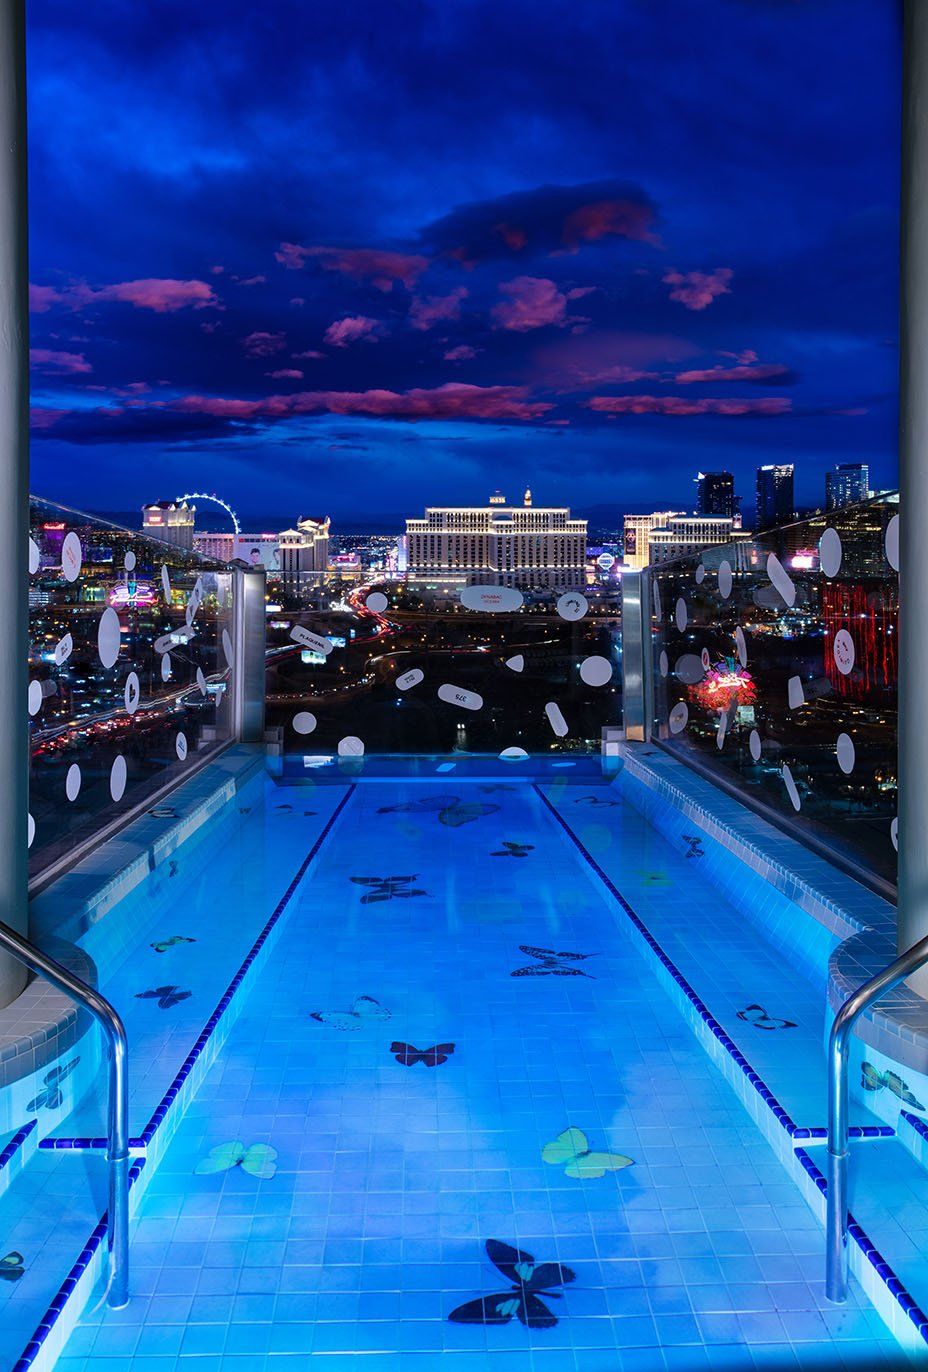  The Jacuzzi and balcony. British artist Damien Hirst has unveiled a hotel suite where a two night stay costs  $200,000 for a minimum two-night stay at the Palms Casino in Las Vegas, setting the new world record for being the World's Most Expensive Suite, according to the World Record Academy. Photo: Courtesy of the Palms Casino Resort